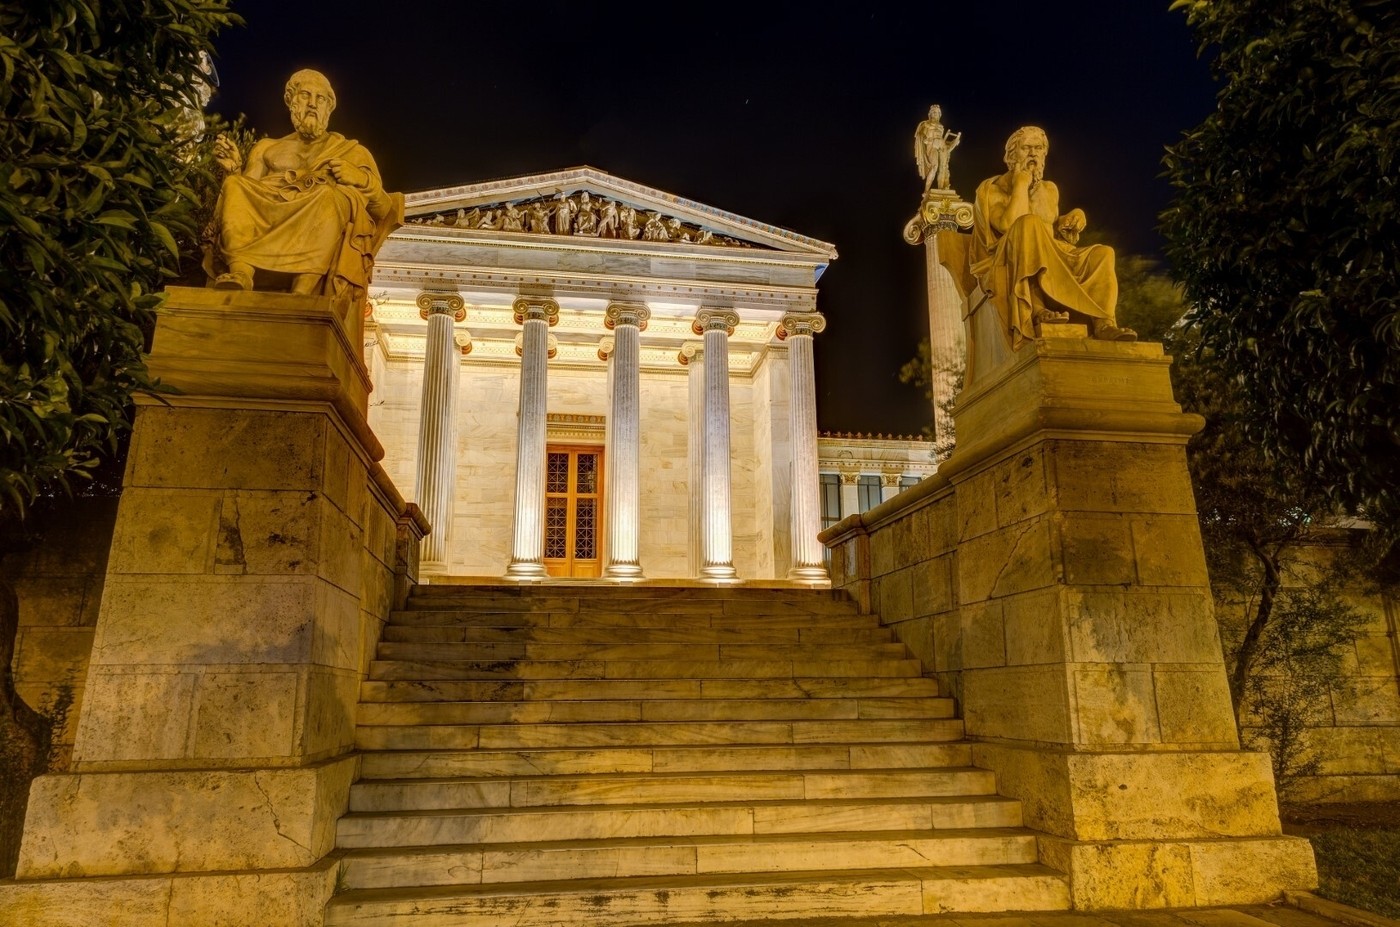 Academy of Athens at night